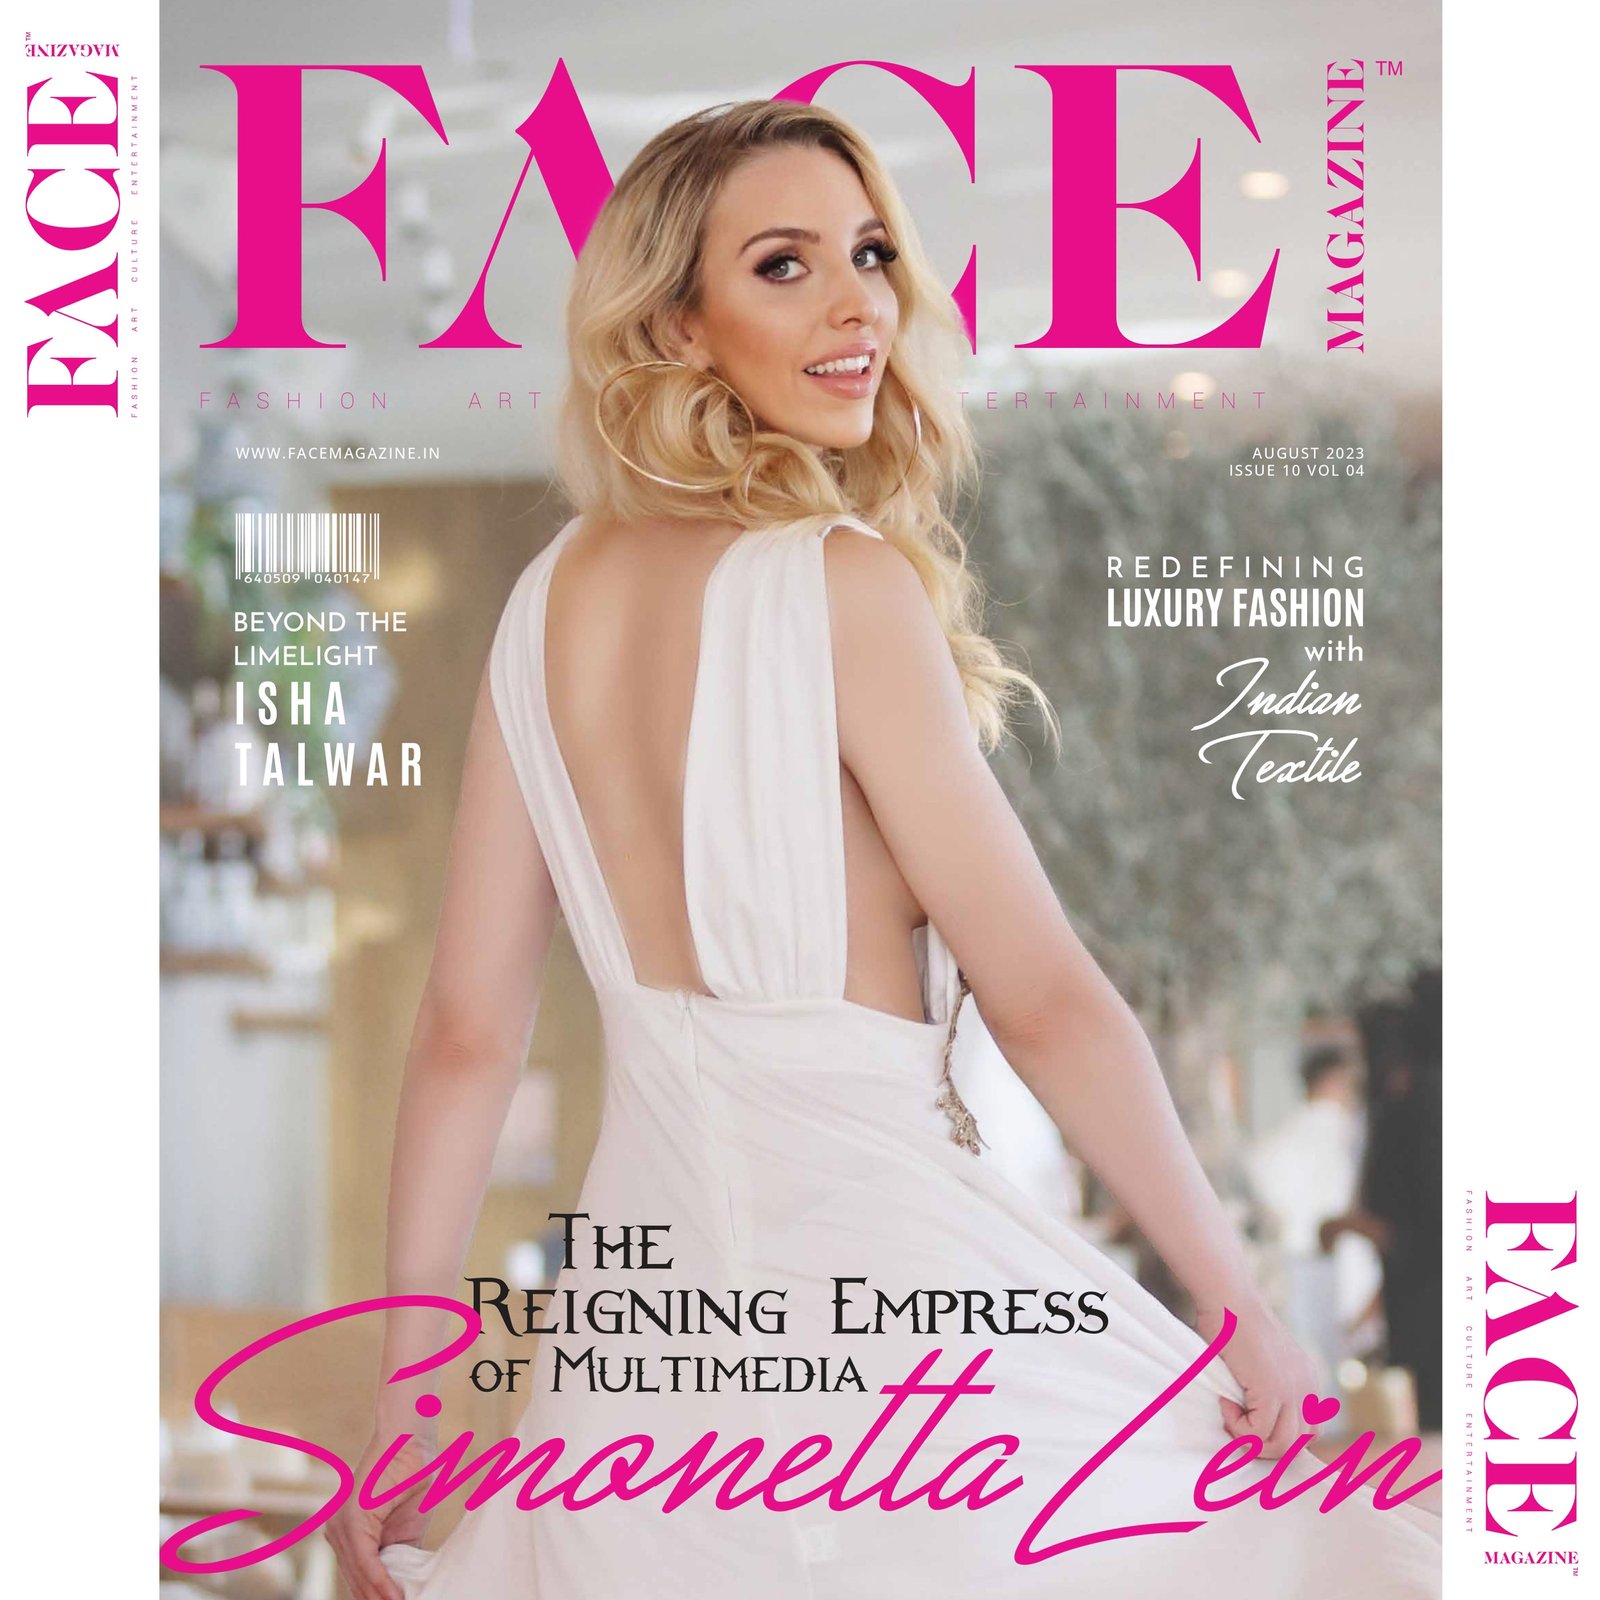 The Reigning Empress of Multimedia:Unfiltered & Unapologetic Simonetta Lein- Cover Story